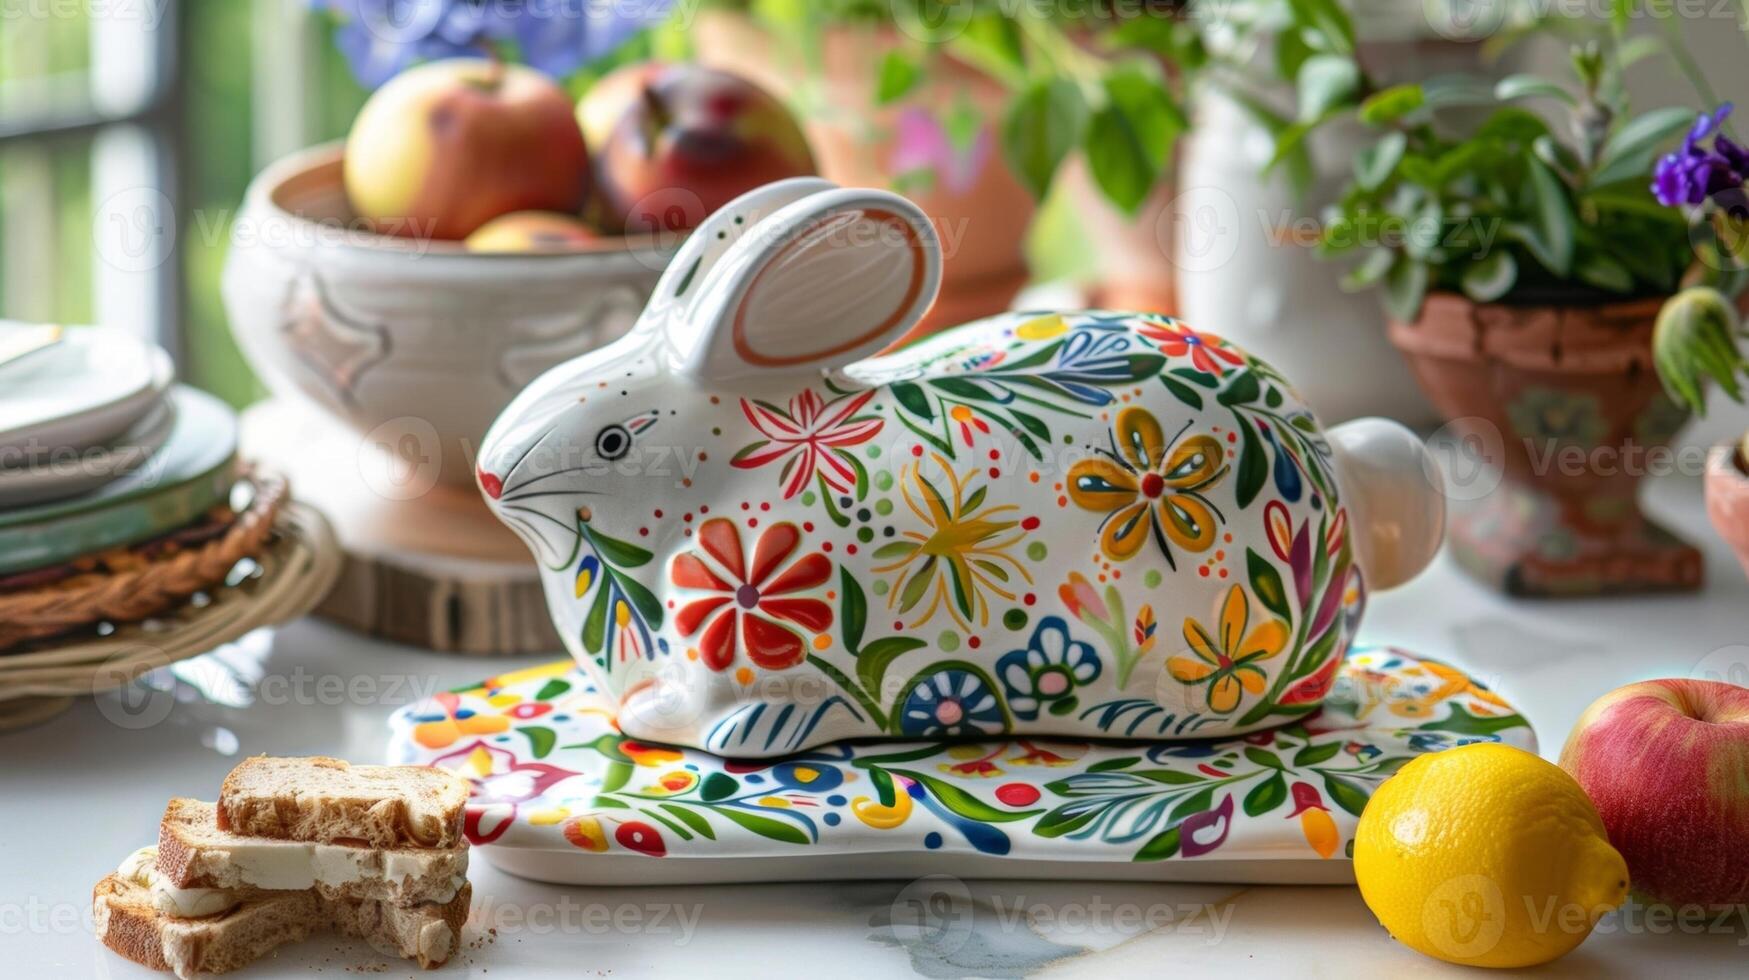 A whimsical ceramic cheese board in the shape of a mouse or rabbit with vibrant colors and patterns adds a fun and playful touch to a kitchen. photo